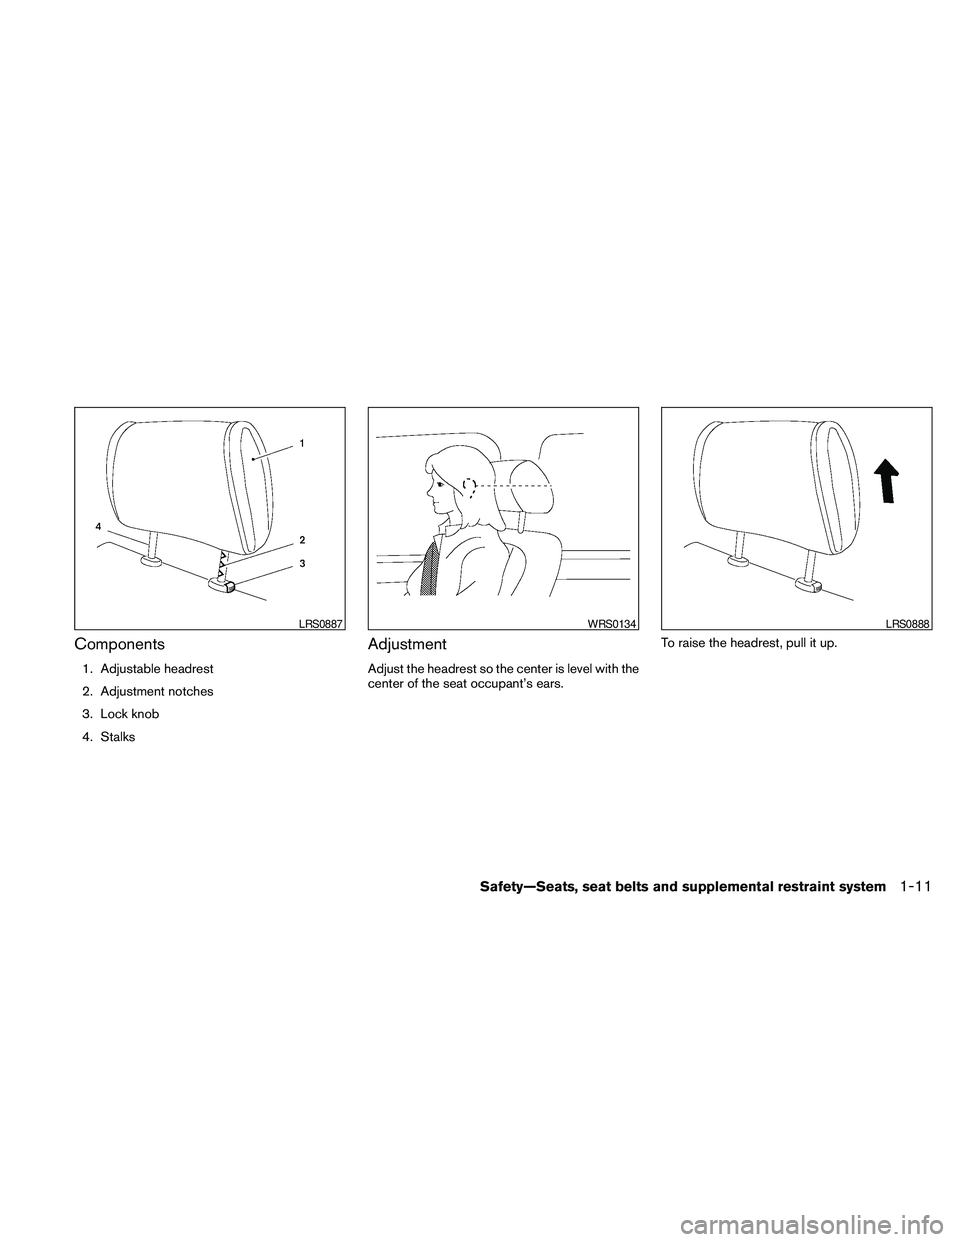 NISSAN MAXIMA 2010  Owner´s Manual Components
1. Adjustable headrest
2. Adjustment notches
3. Lock knob
4. Stalks
Adjustment
Adjust the headrest so the center is level with the
center of the seat occupant’s ears.To raise the headrest